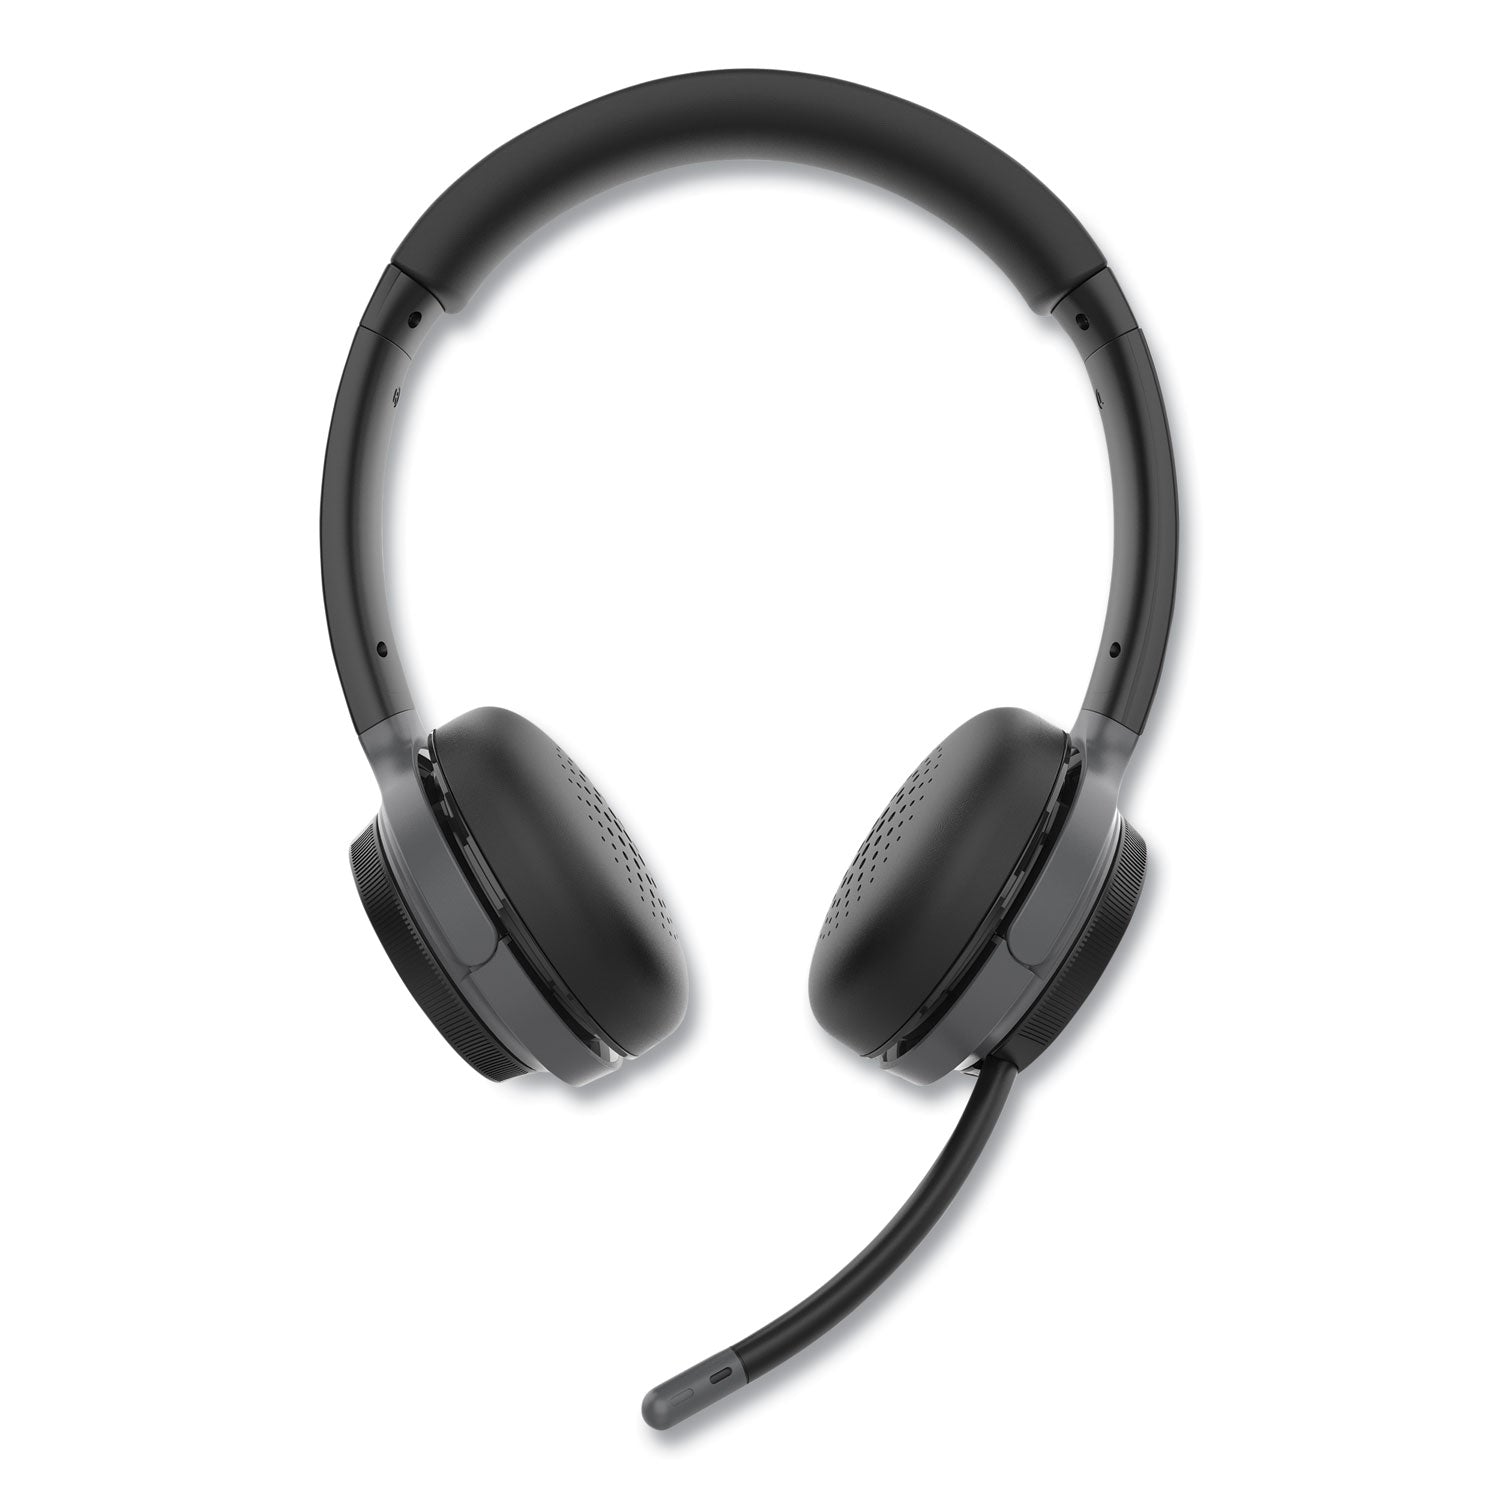 hs6500sbt-advantage-wireless-stereo-headset-with-detachable-boom-microphone_mhshs6500sbt - 3